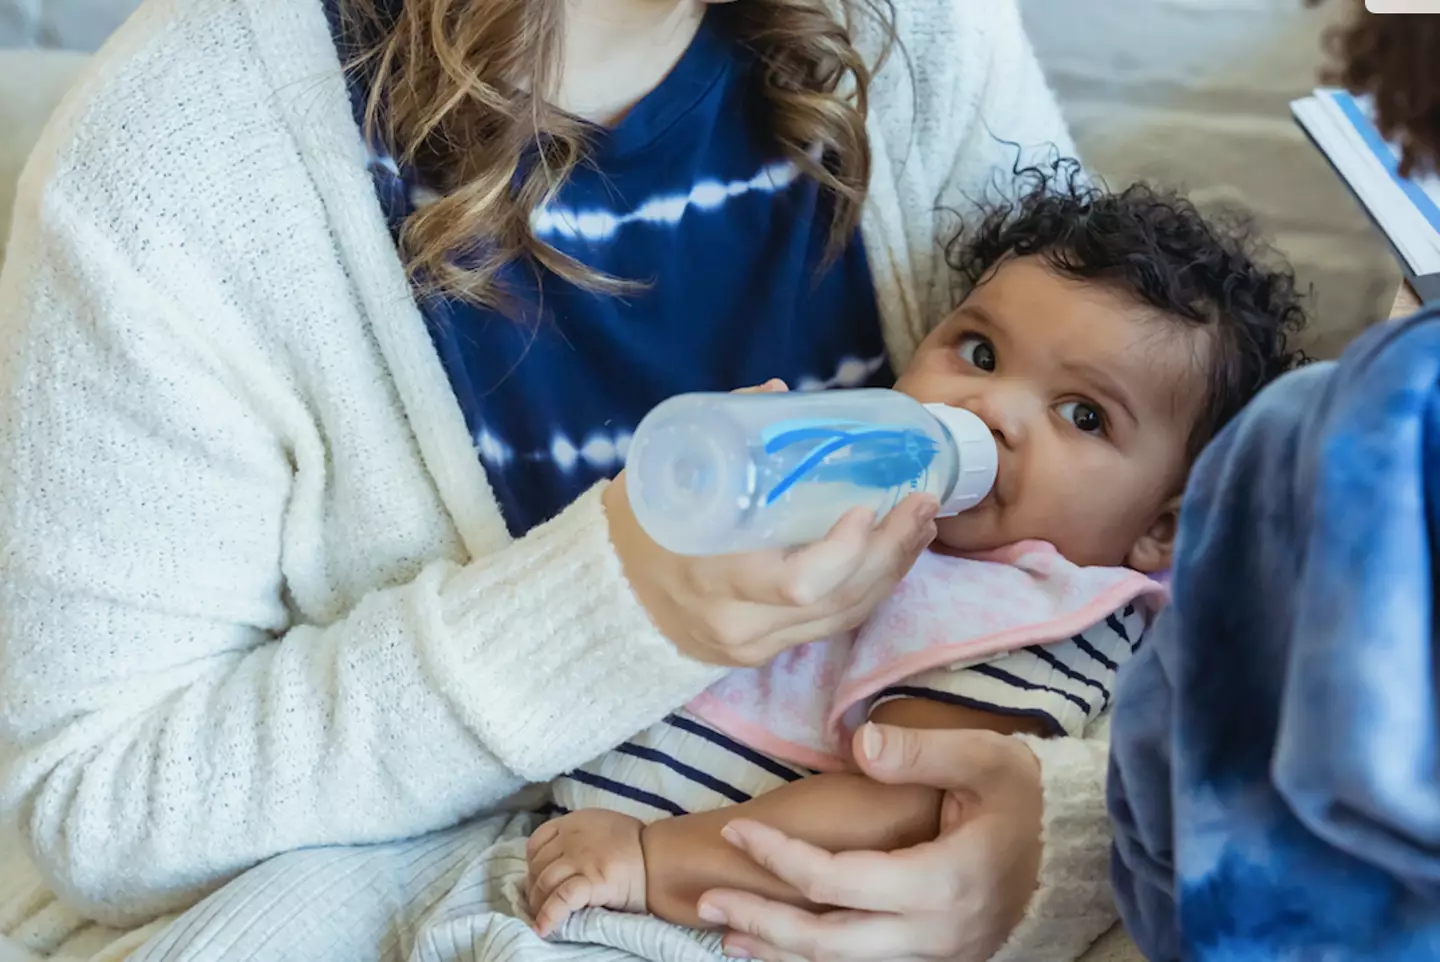 The company said bottle-feeding was better for busy mums (